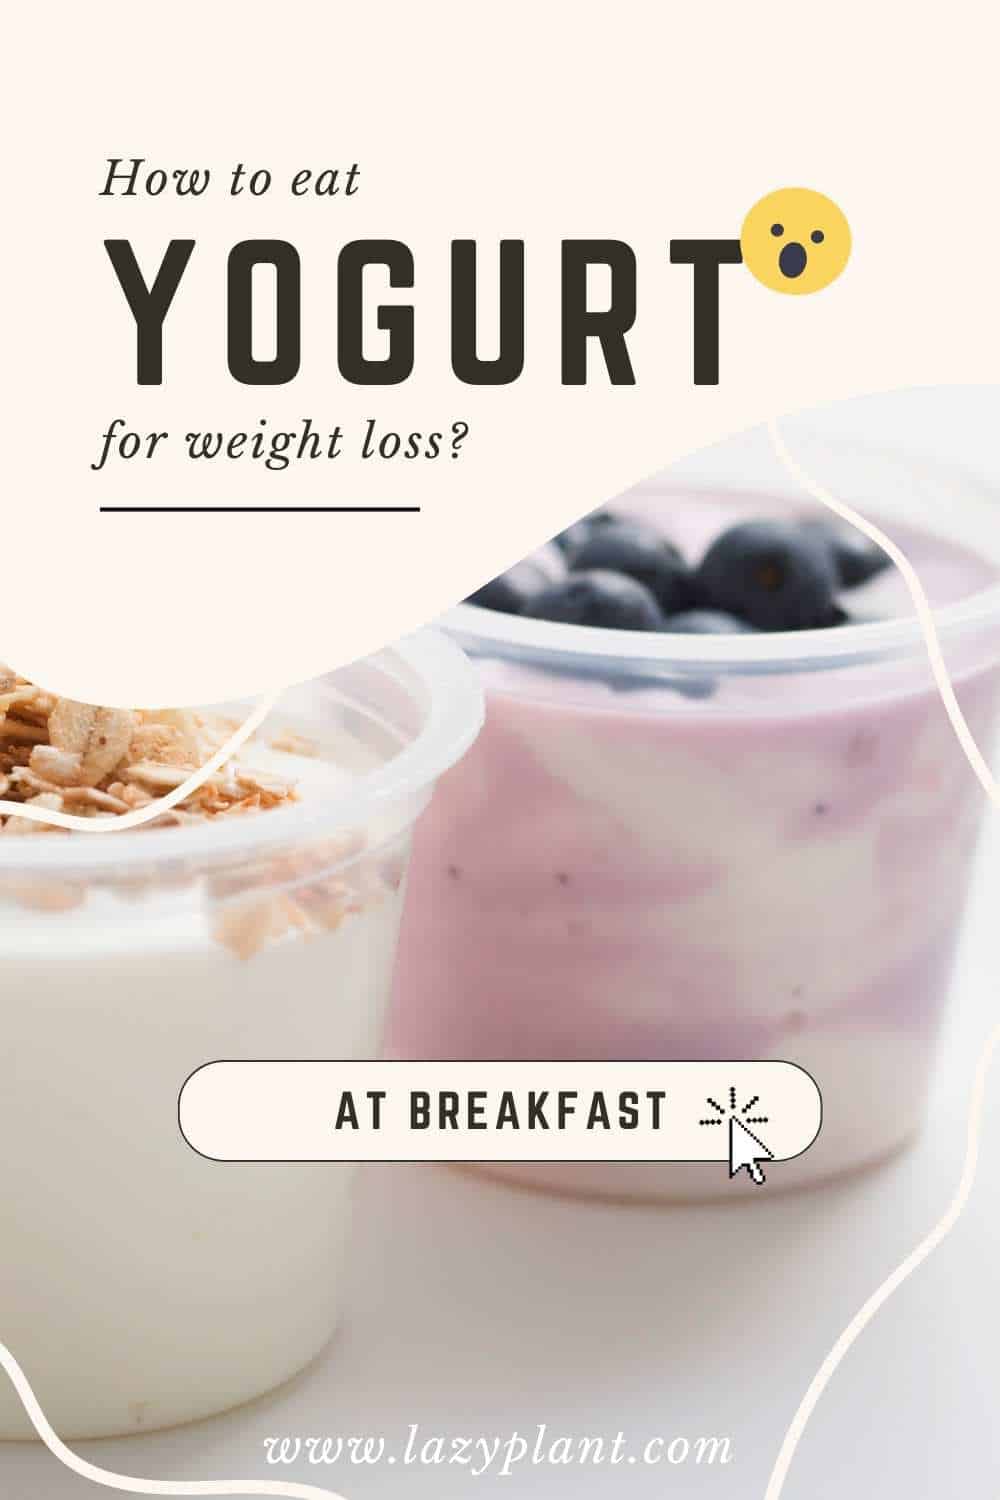 What foods should I add to yogurt for the best weight-loss breakfast?